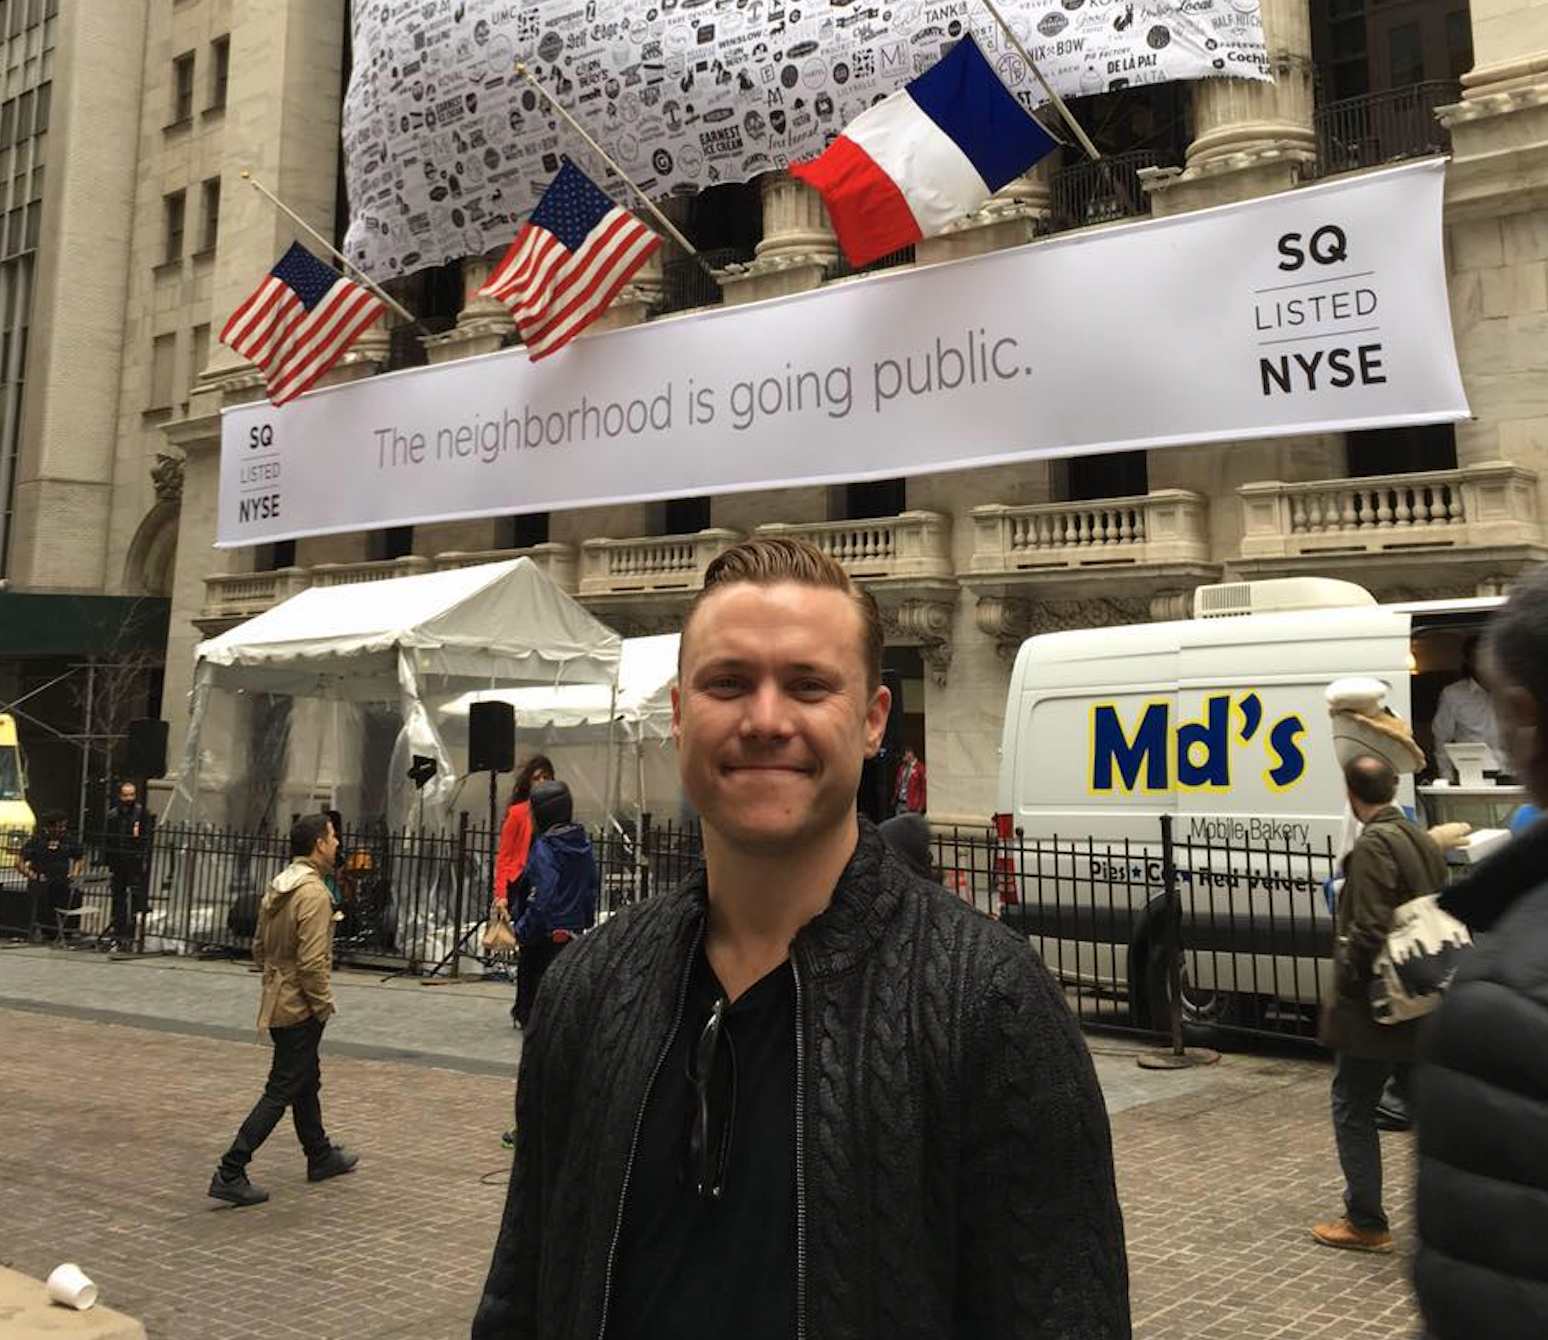 Bob Lee pictured at the New York Stock Exchange in 2015 on the day that Square, now known as Block, listed as a public company